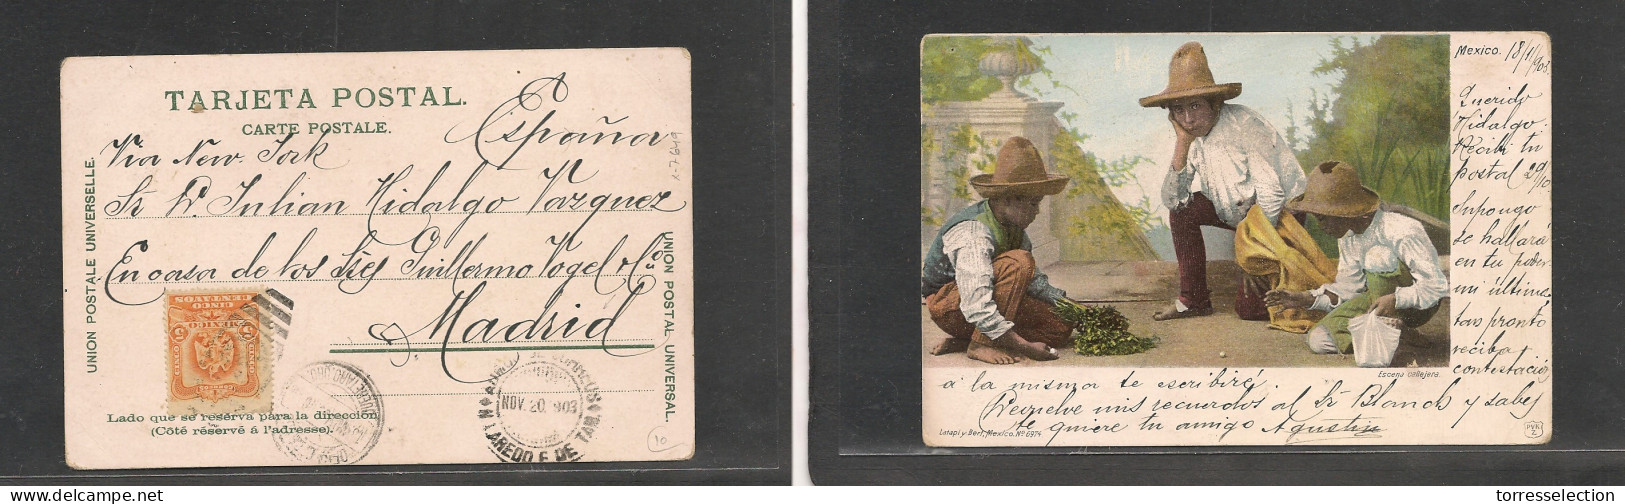 MEXICO. Mexico Cover - 1903 Queretaro To Spain Madrid Fkd Pcard Children Playing XSALE. - Mexico